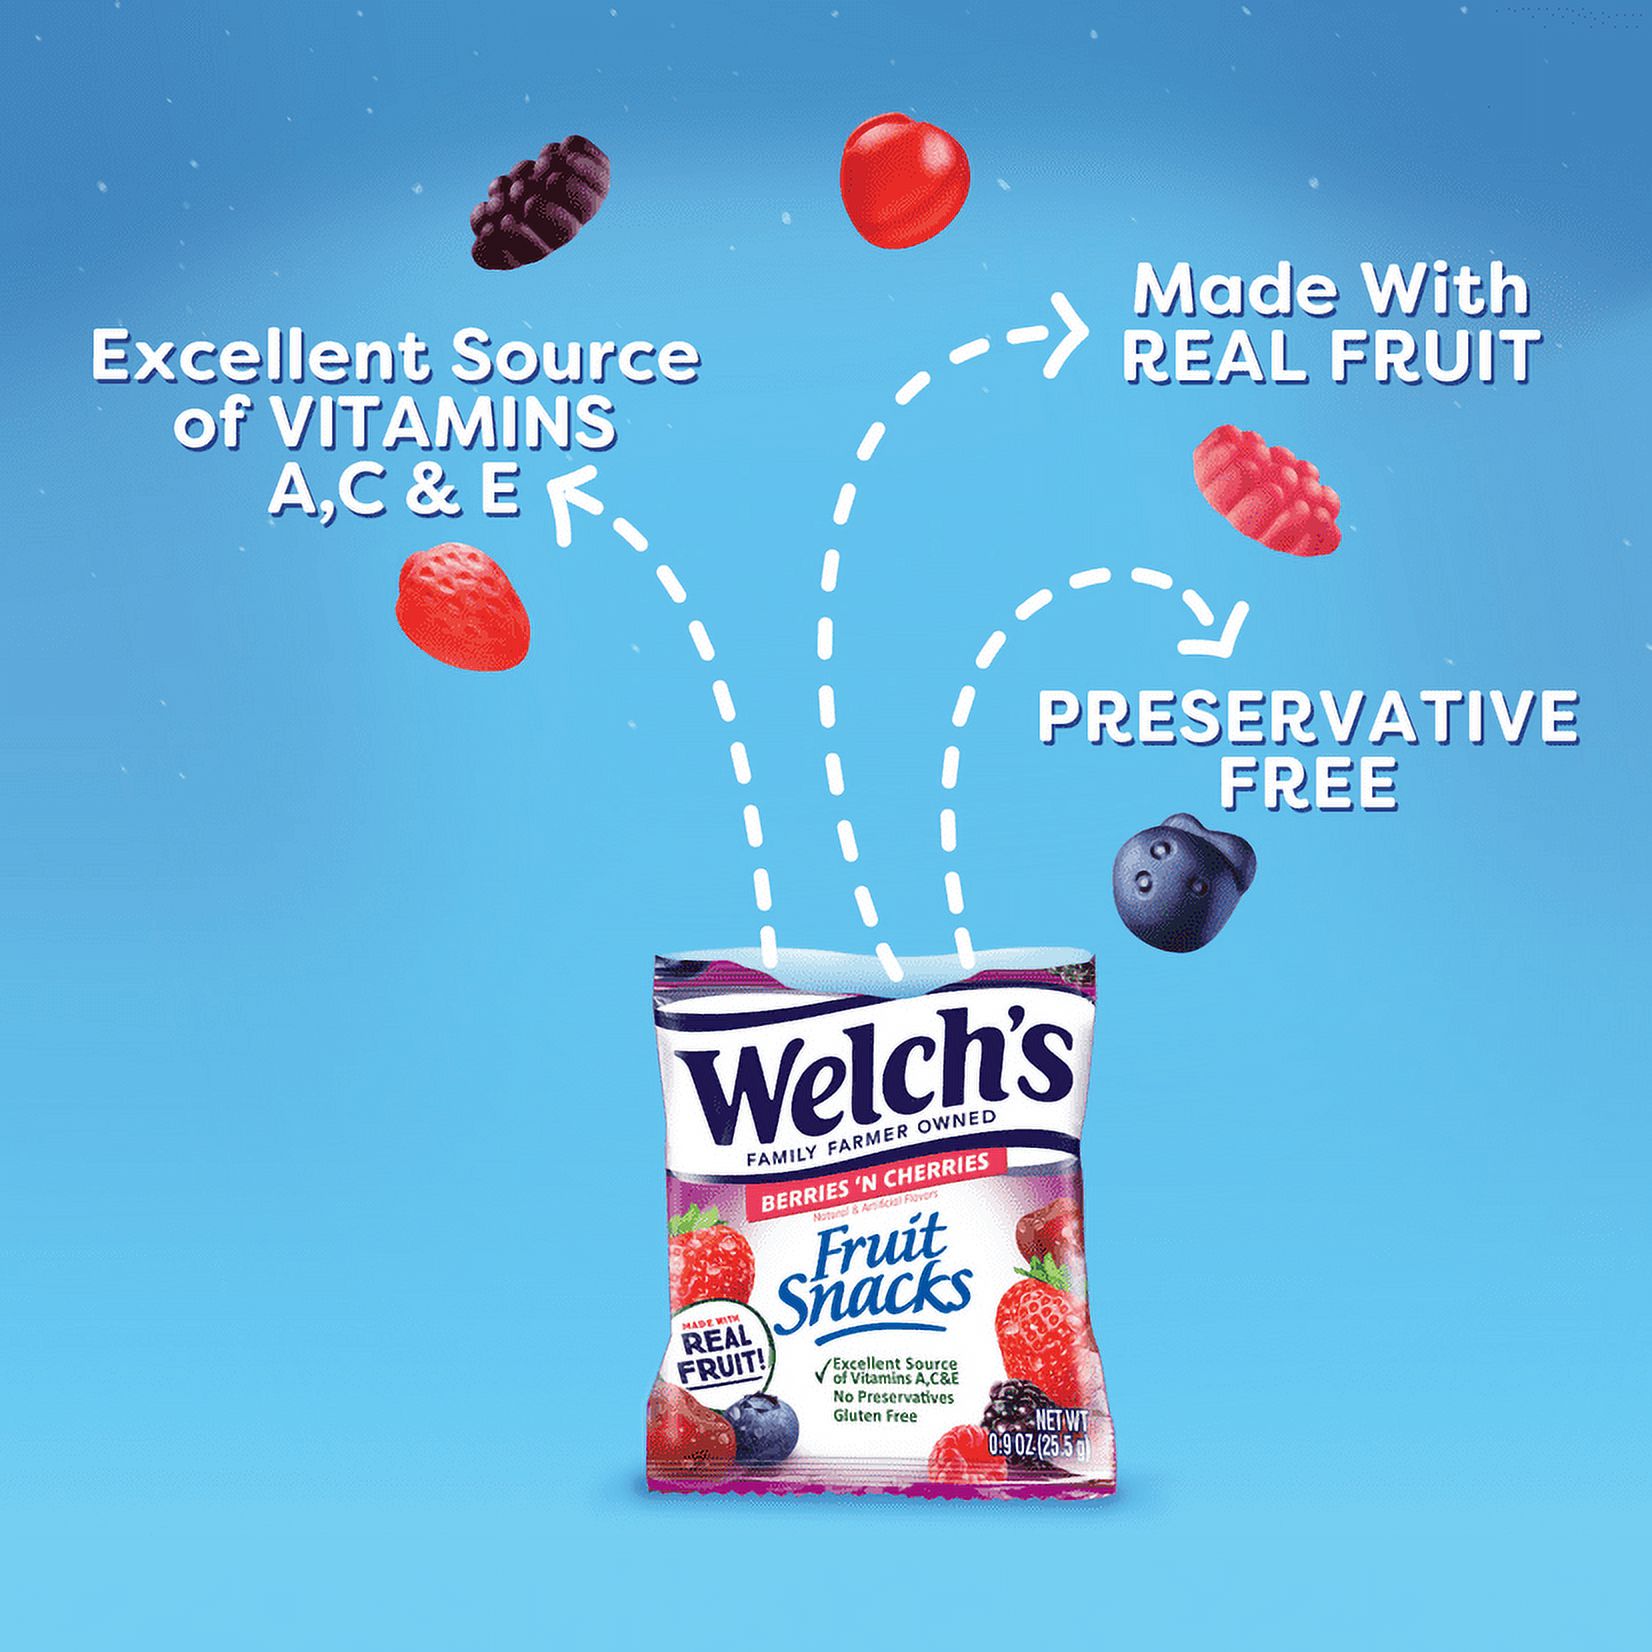 Welch's Fruit Punch and Berries 'N Cherries Fruit Snacks Variety Pack, 0.9 oz, 22 count - image 3 of 7